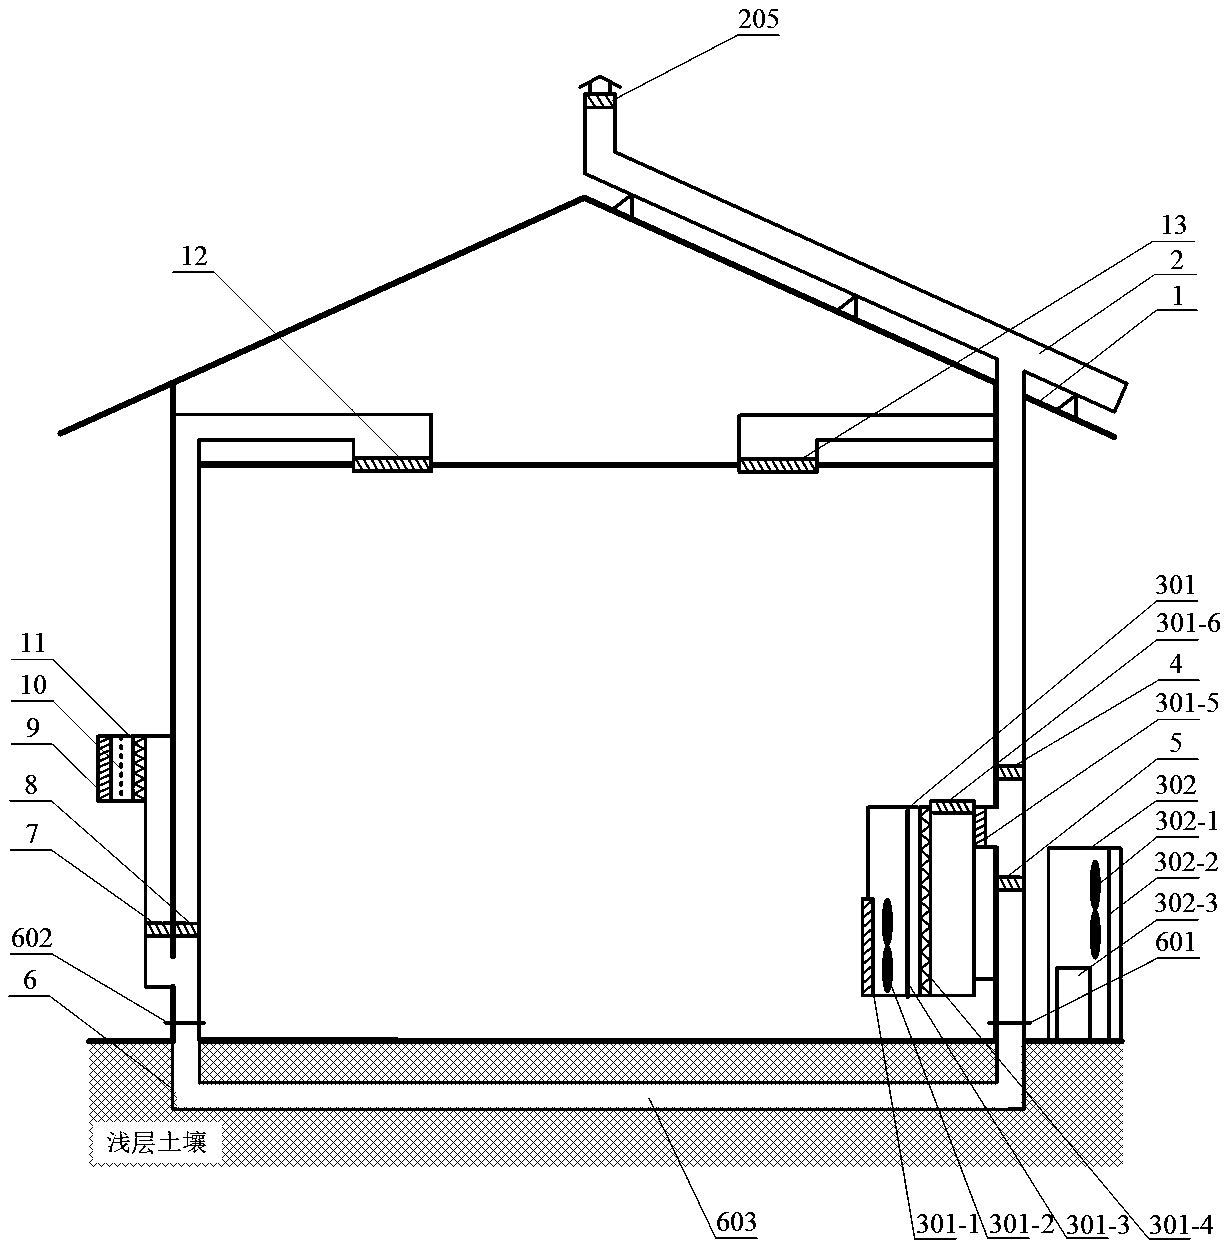 Low-energy-consumption rural house indoor thermal environment regulation and control system